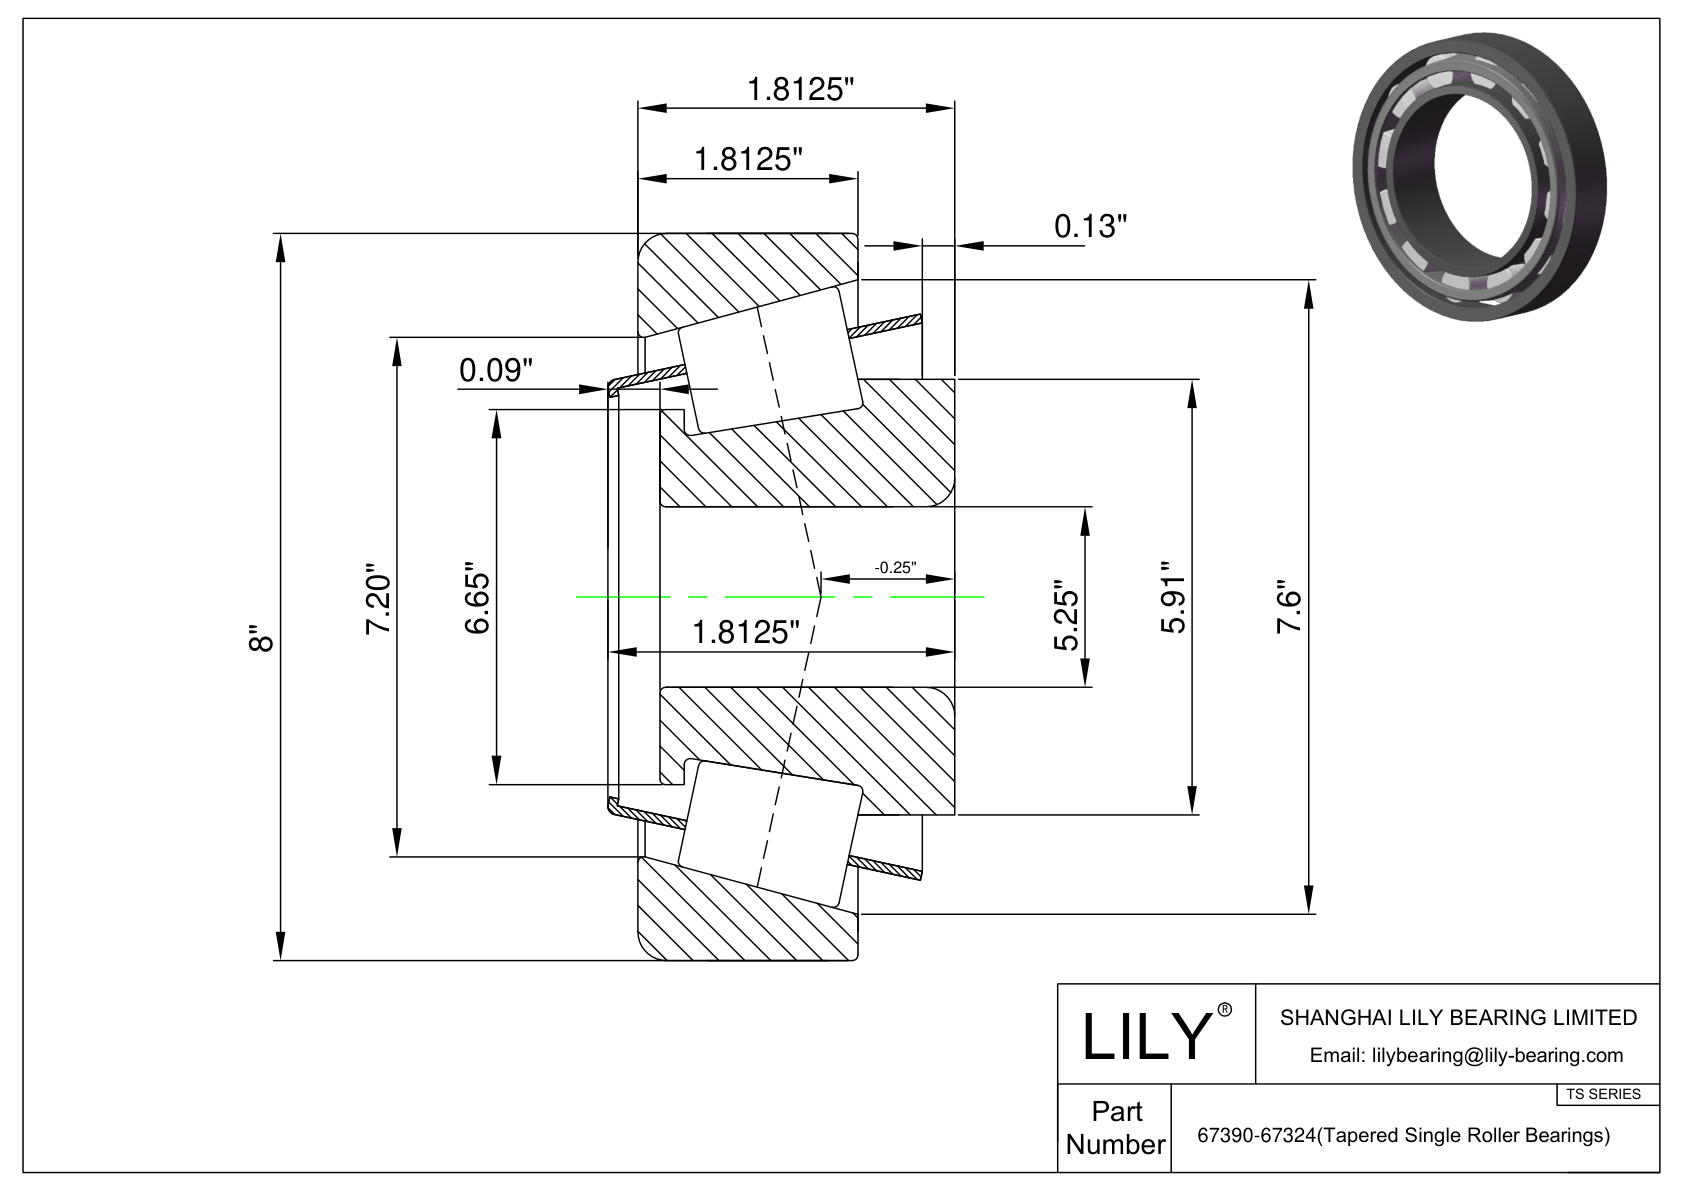 67390-67324 TS (Tapered Single Roller Bearings) (Imperial) cad drawing